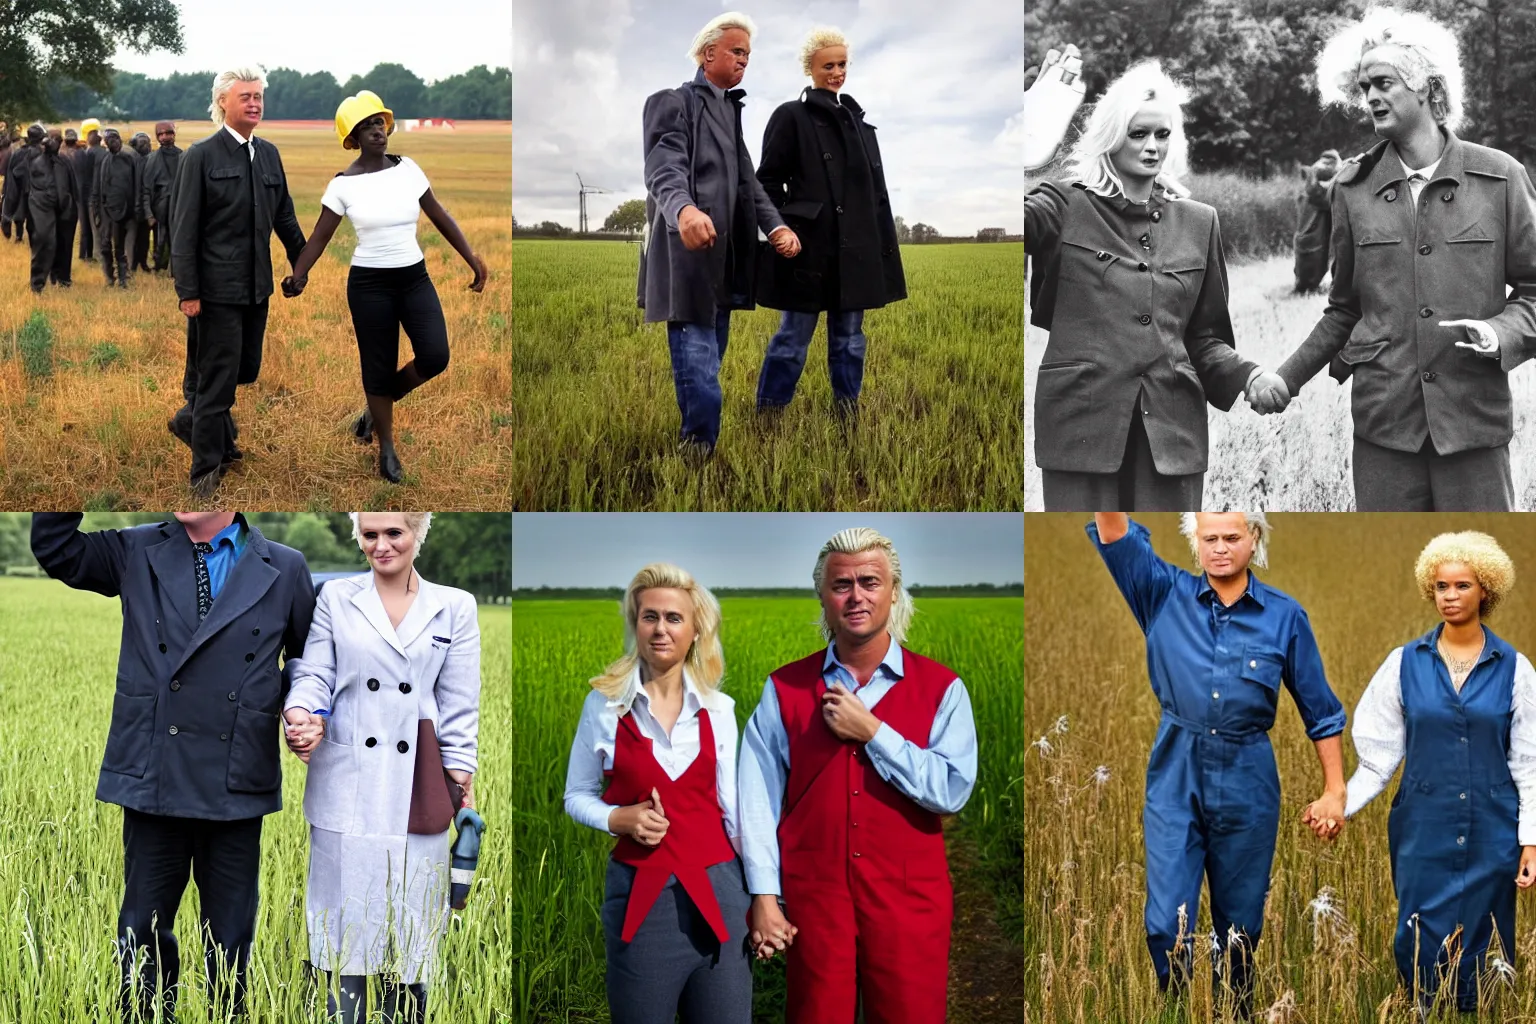 Prompt: Geert Wilders and Sylvana Simons dressed as factory workers, holding hands in a field in the style of Soviet propaganda